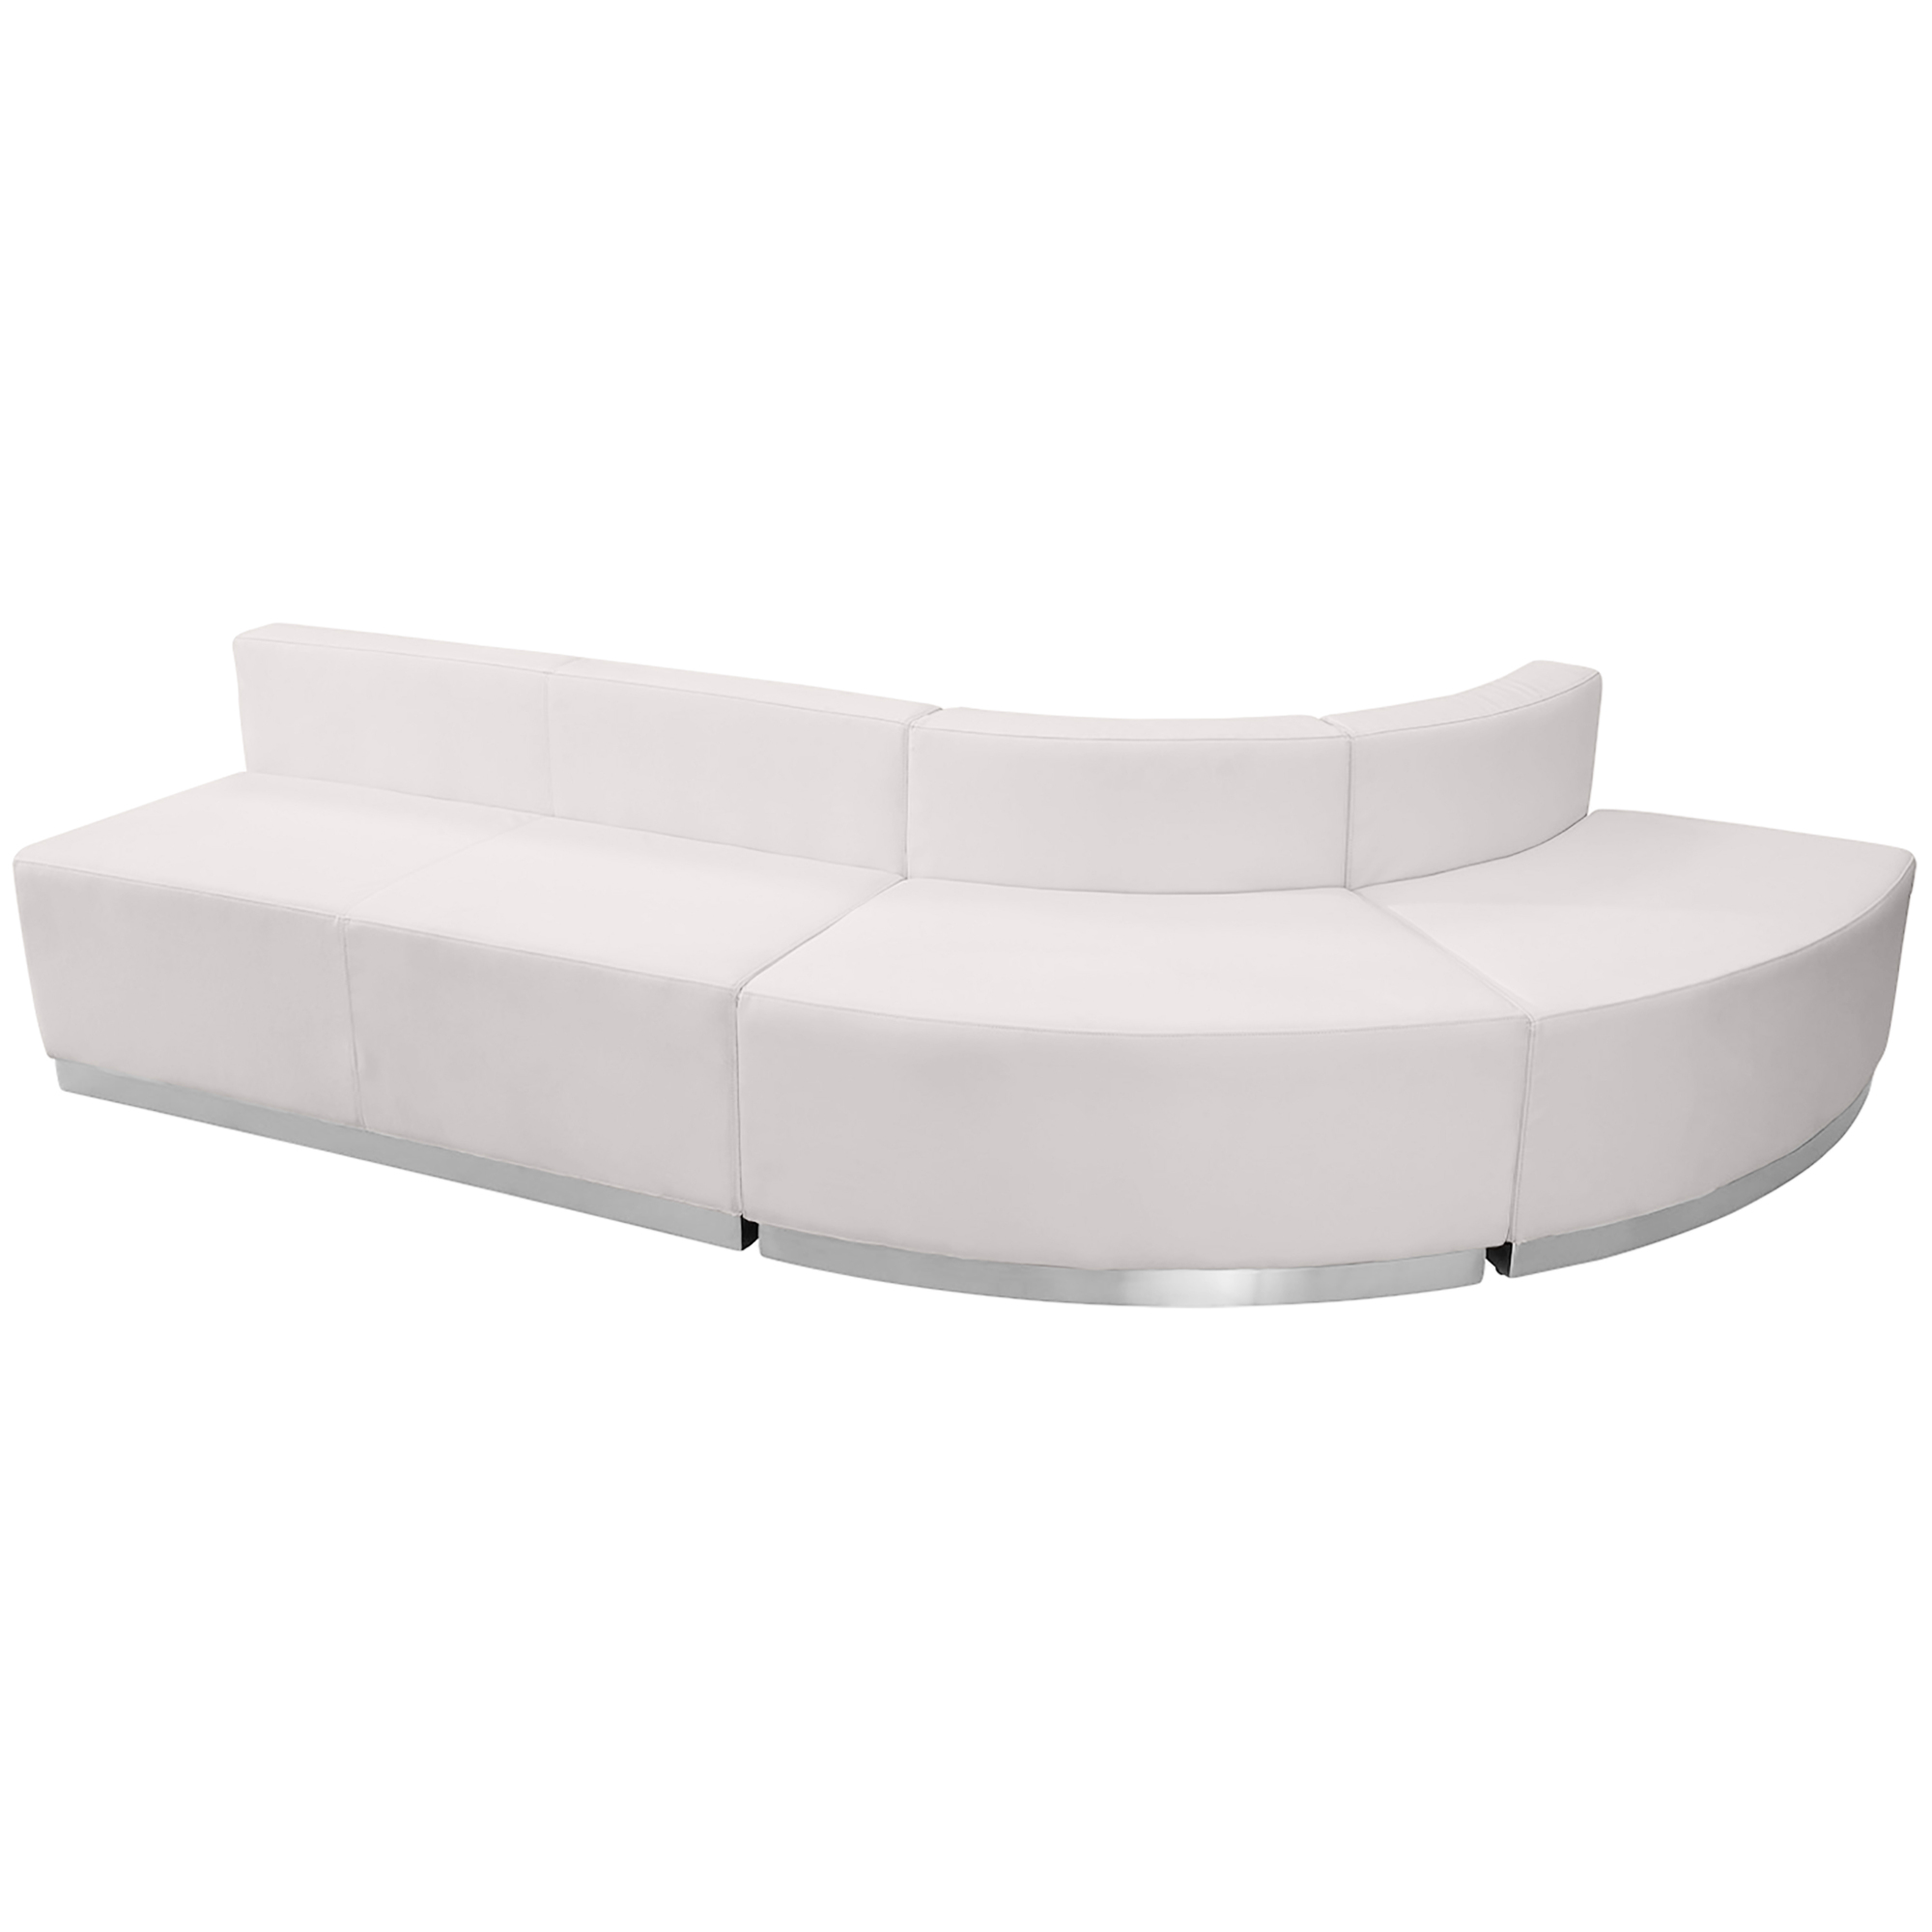 Flash Furniture, 3 PC White LeatherSoft Reception Configuration, Primary Color White, Included (qty.) 3, Model ZB803790SWH